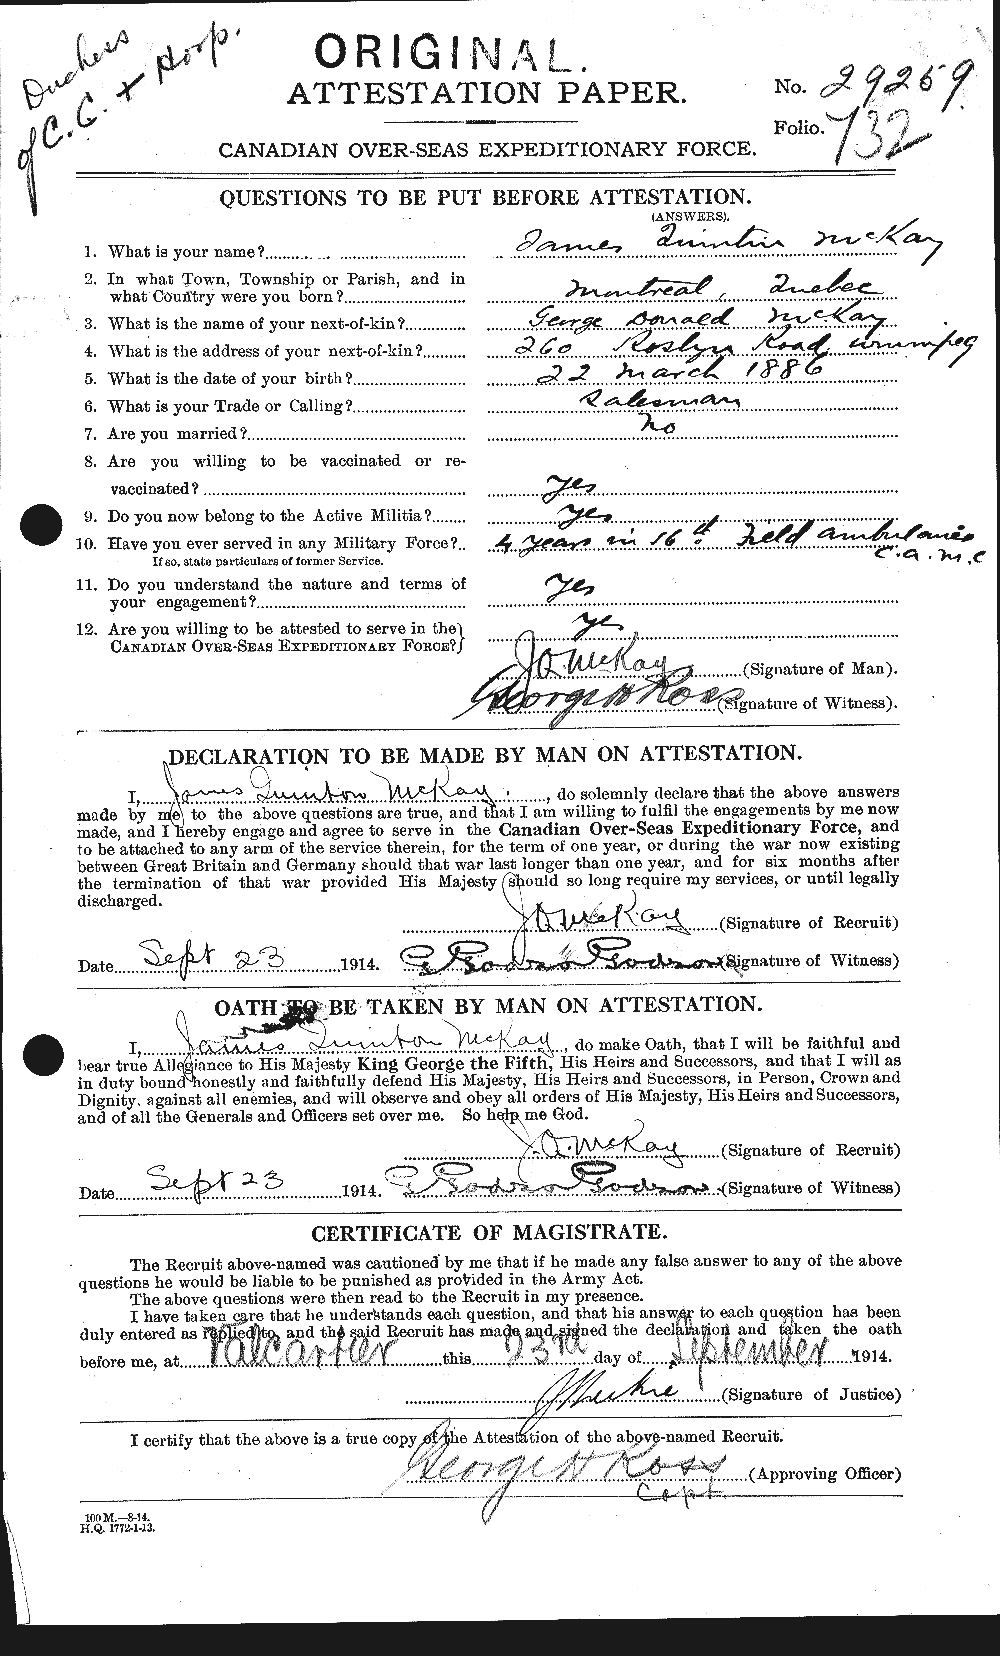 Personnel Records of the First World War - CEF 534841a